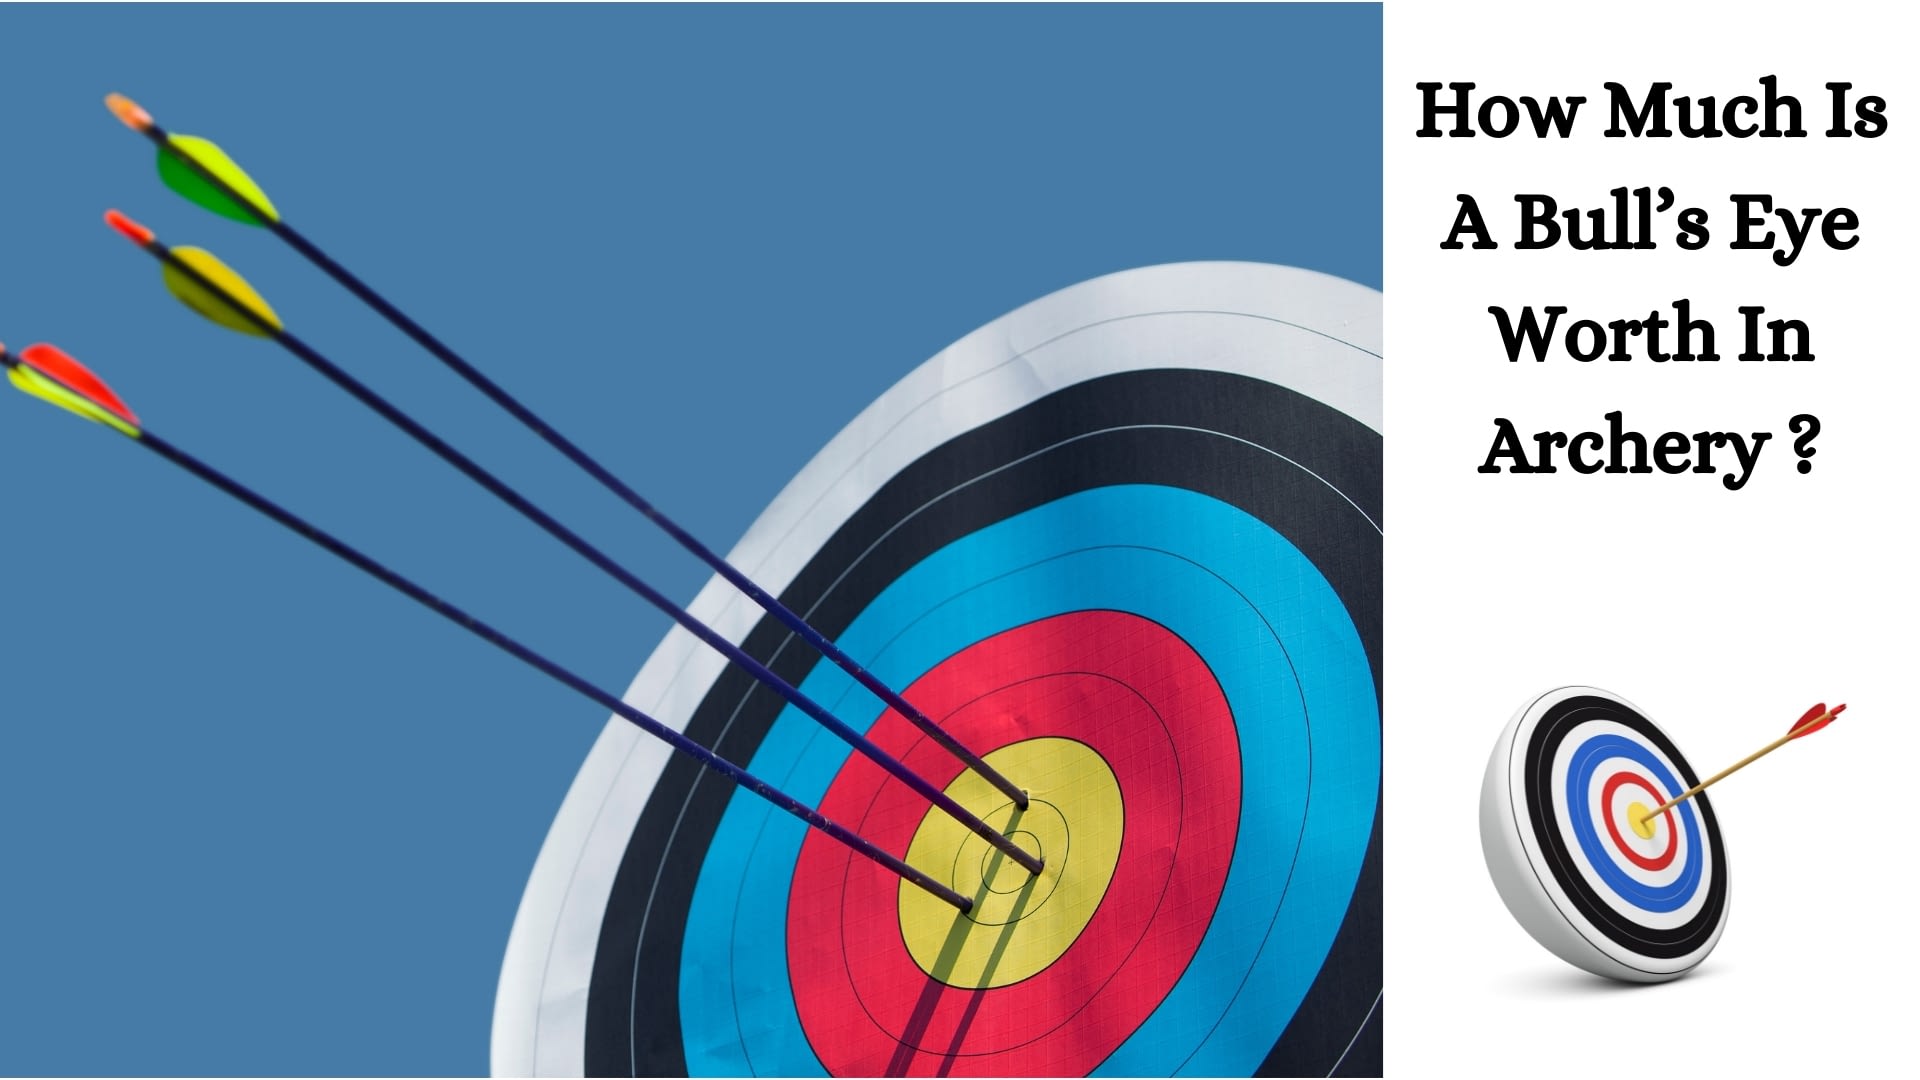 How Much Is A Bull’s Eye Worth In Archery